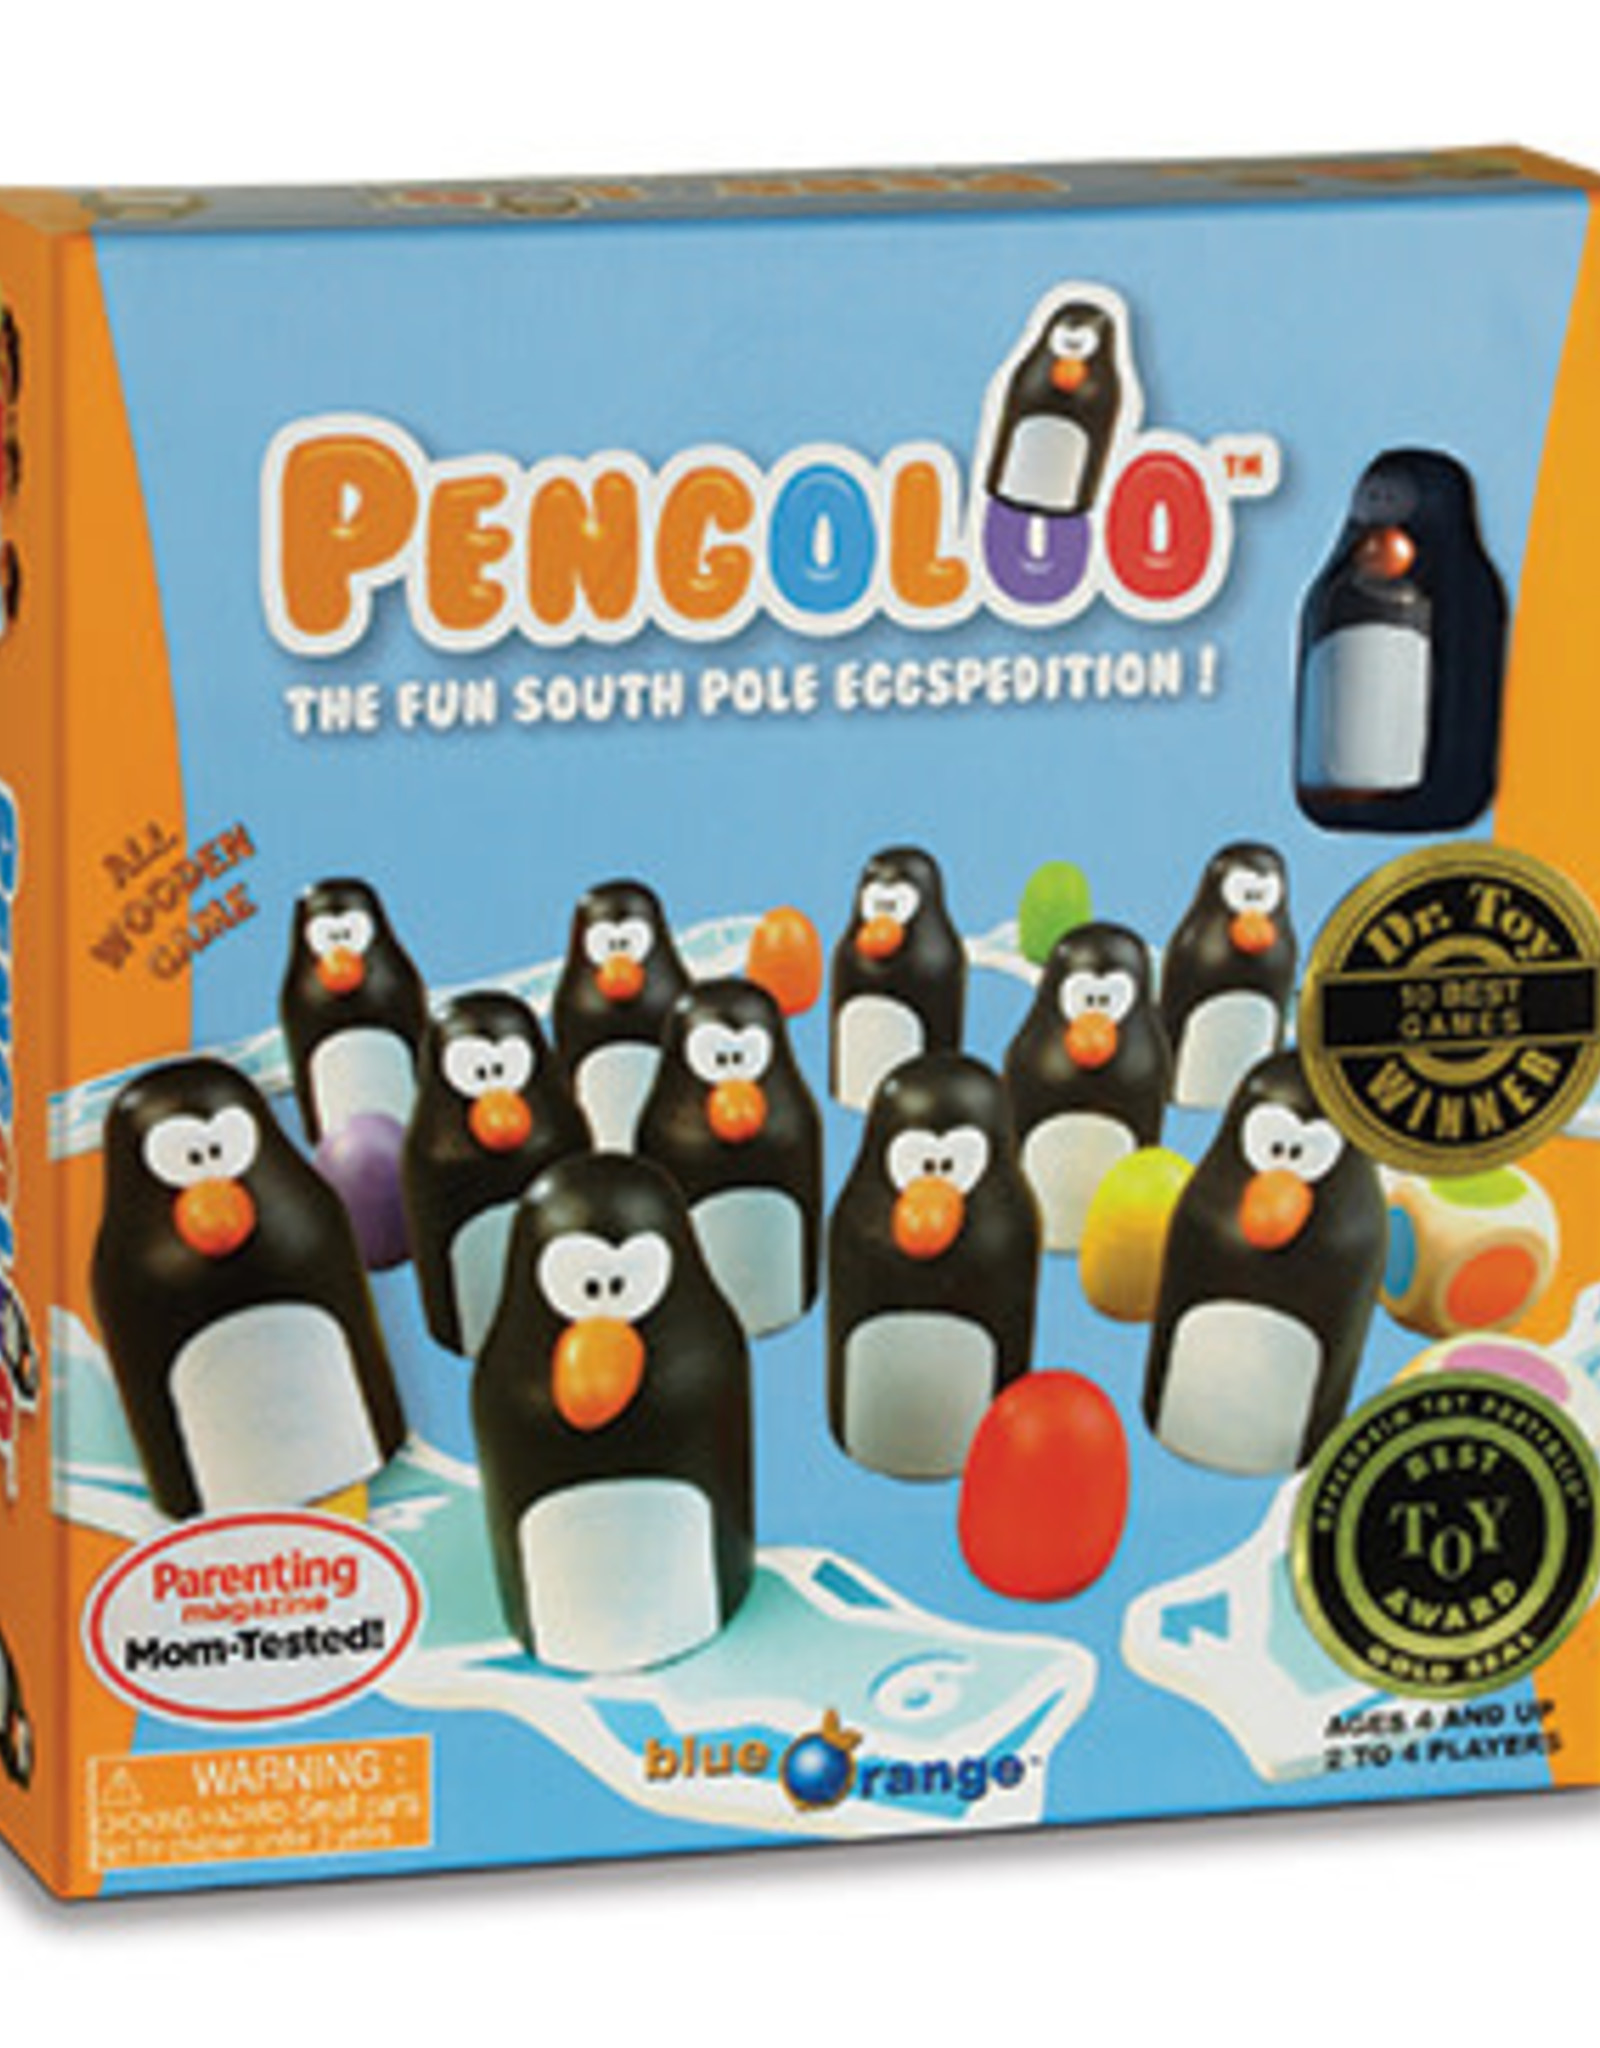 Pengoloo - Tildie's Toy Box